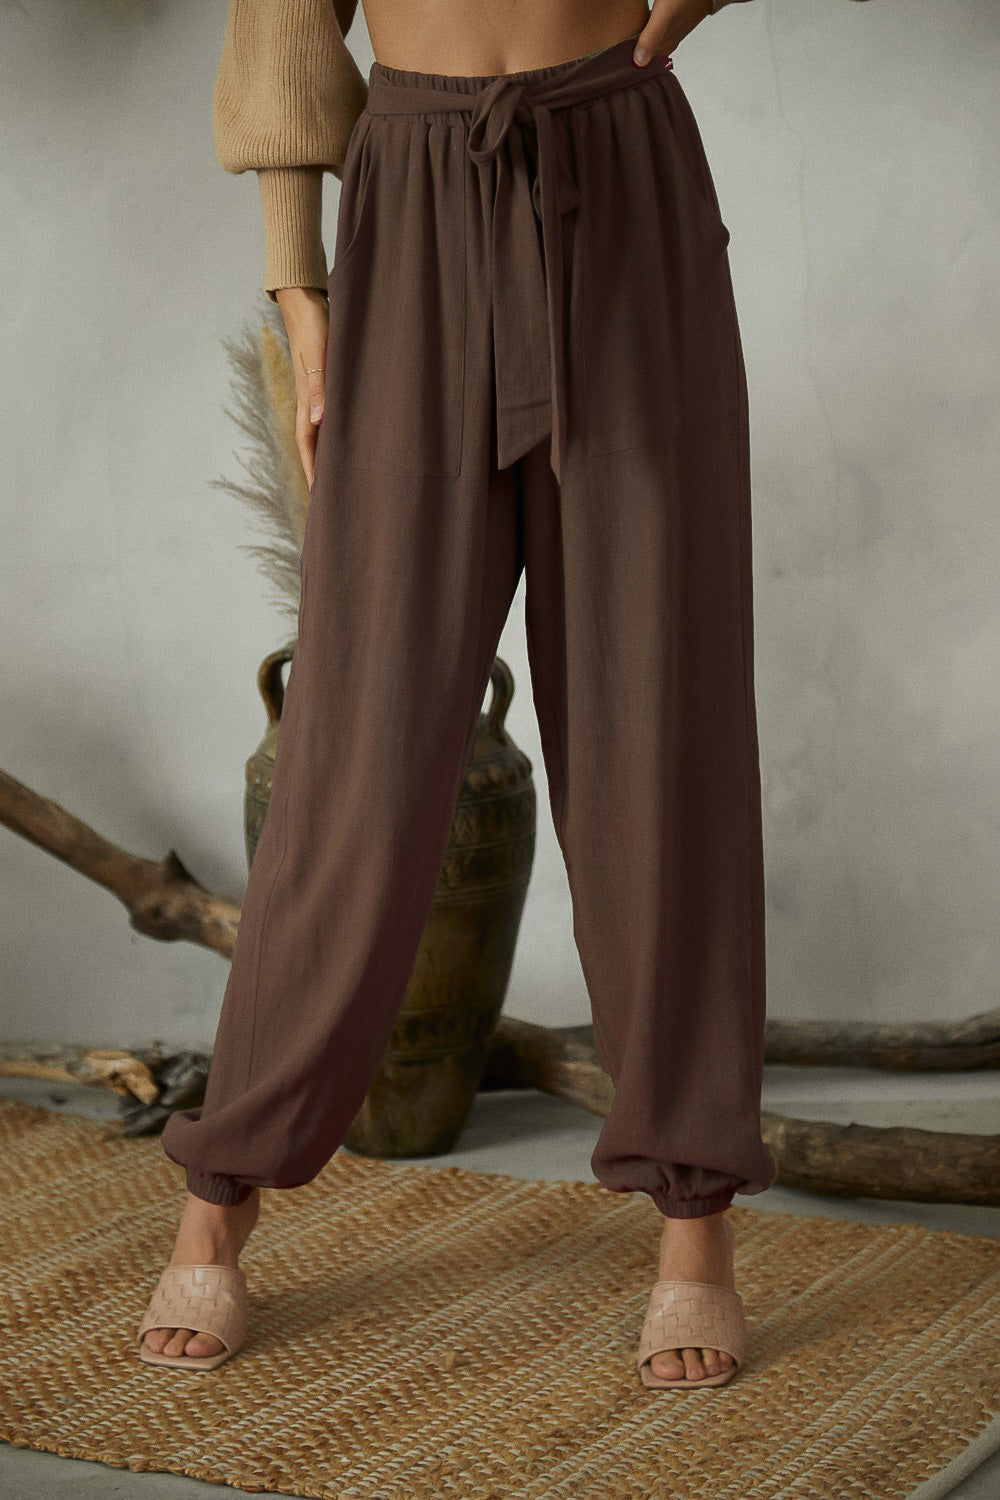 Harem Pants in Chocolate Brown. Scarlette The Label, an online fashion boutique for women.Tie Front Harem Pants in Chocolate Brown. Scarlette The Label, an online fashion boutique for women.